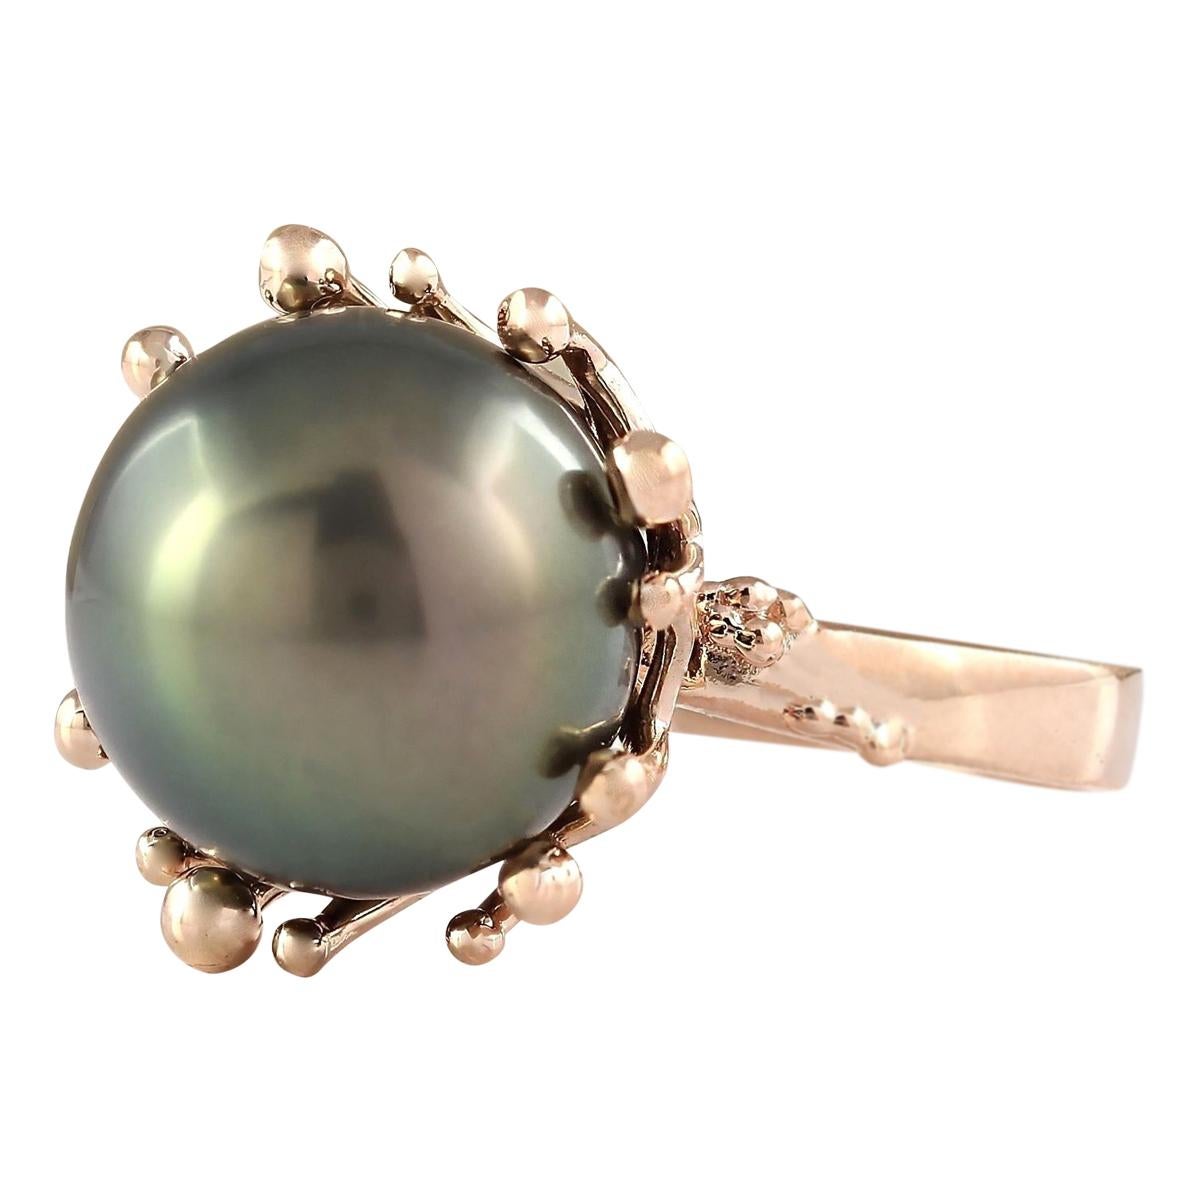 Stamped: 14K Rose Gold
Total Ring Weight: 7.6 Grams
Total Natural South Sea Pearl Weight is N/A (Measures: 12.50 mm)
Color: Black
Face Measures: 16.65x15.10 mm
Sku: [704274W]